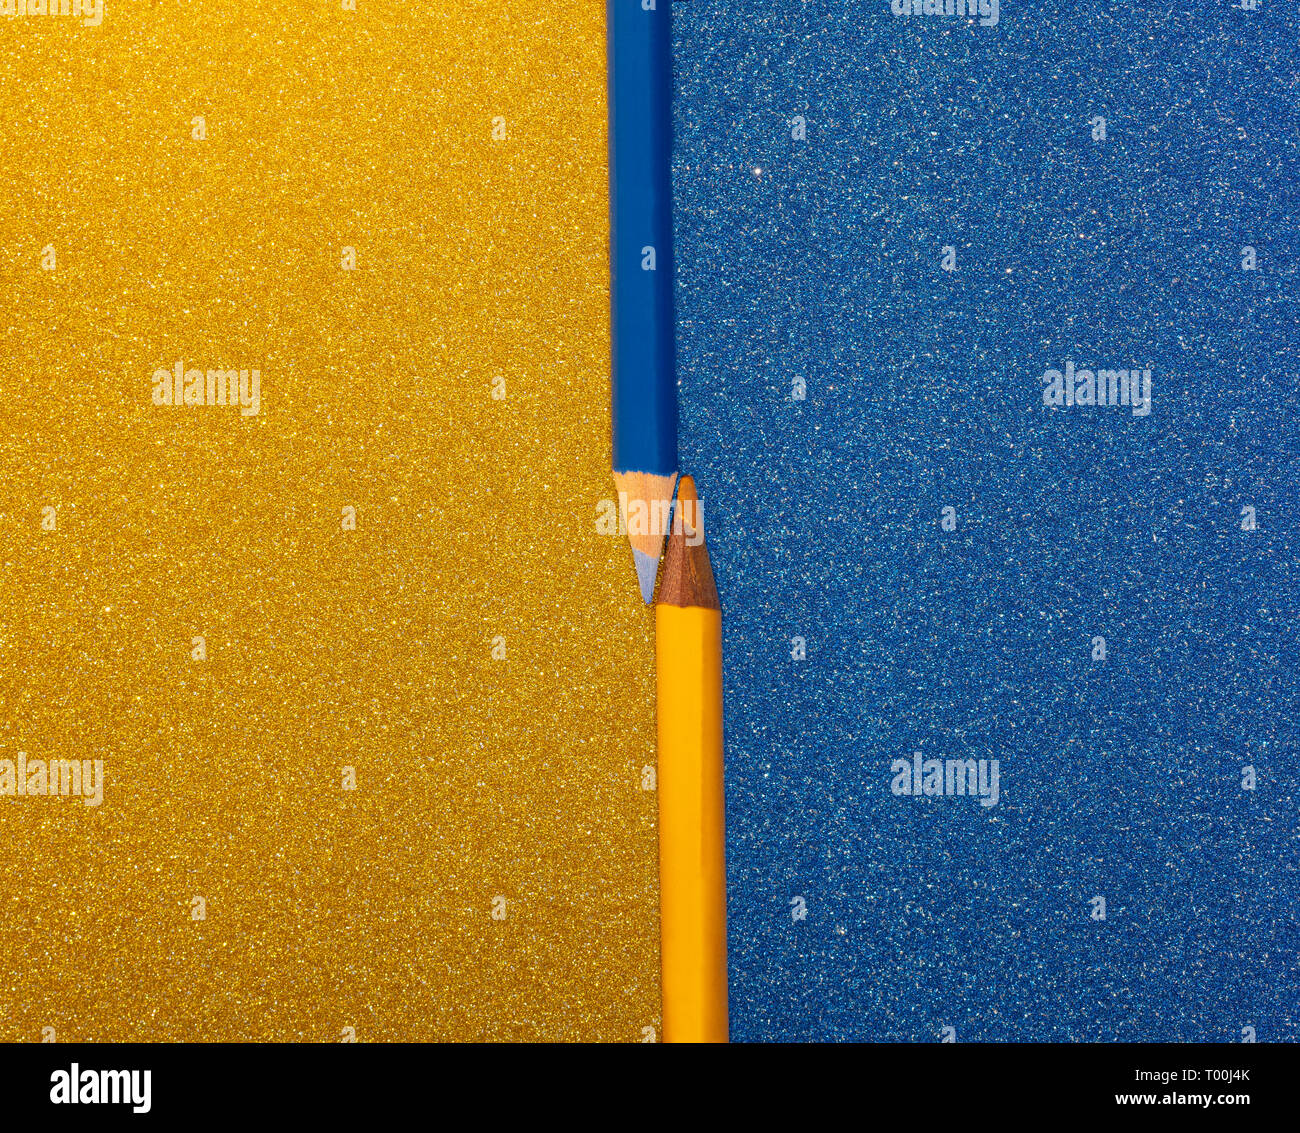 two pencils, blue and yellow on colored and brilliant cards placed contrasting the background, free space for text on both sides Stock Photo